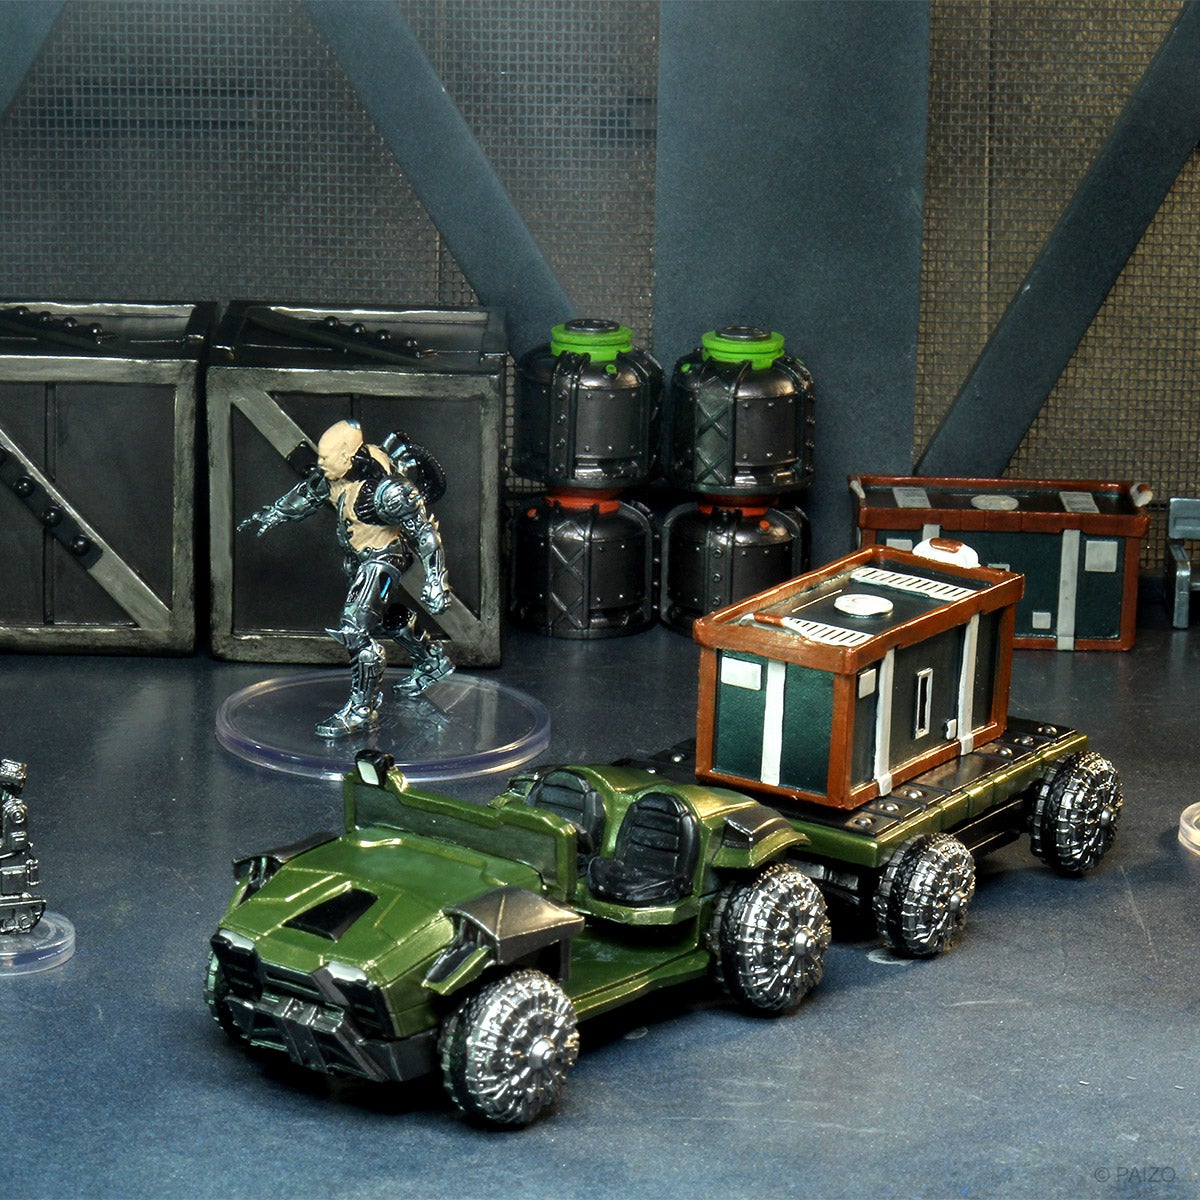 Mini figures set in a docking bay scene, featuring a transport vehicle towing a large box